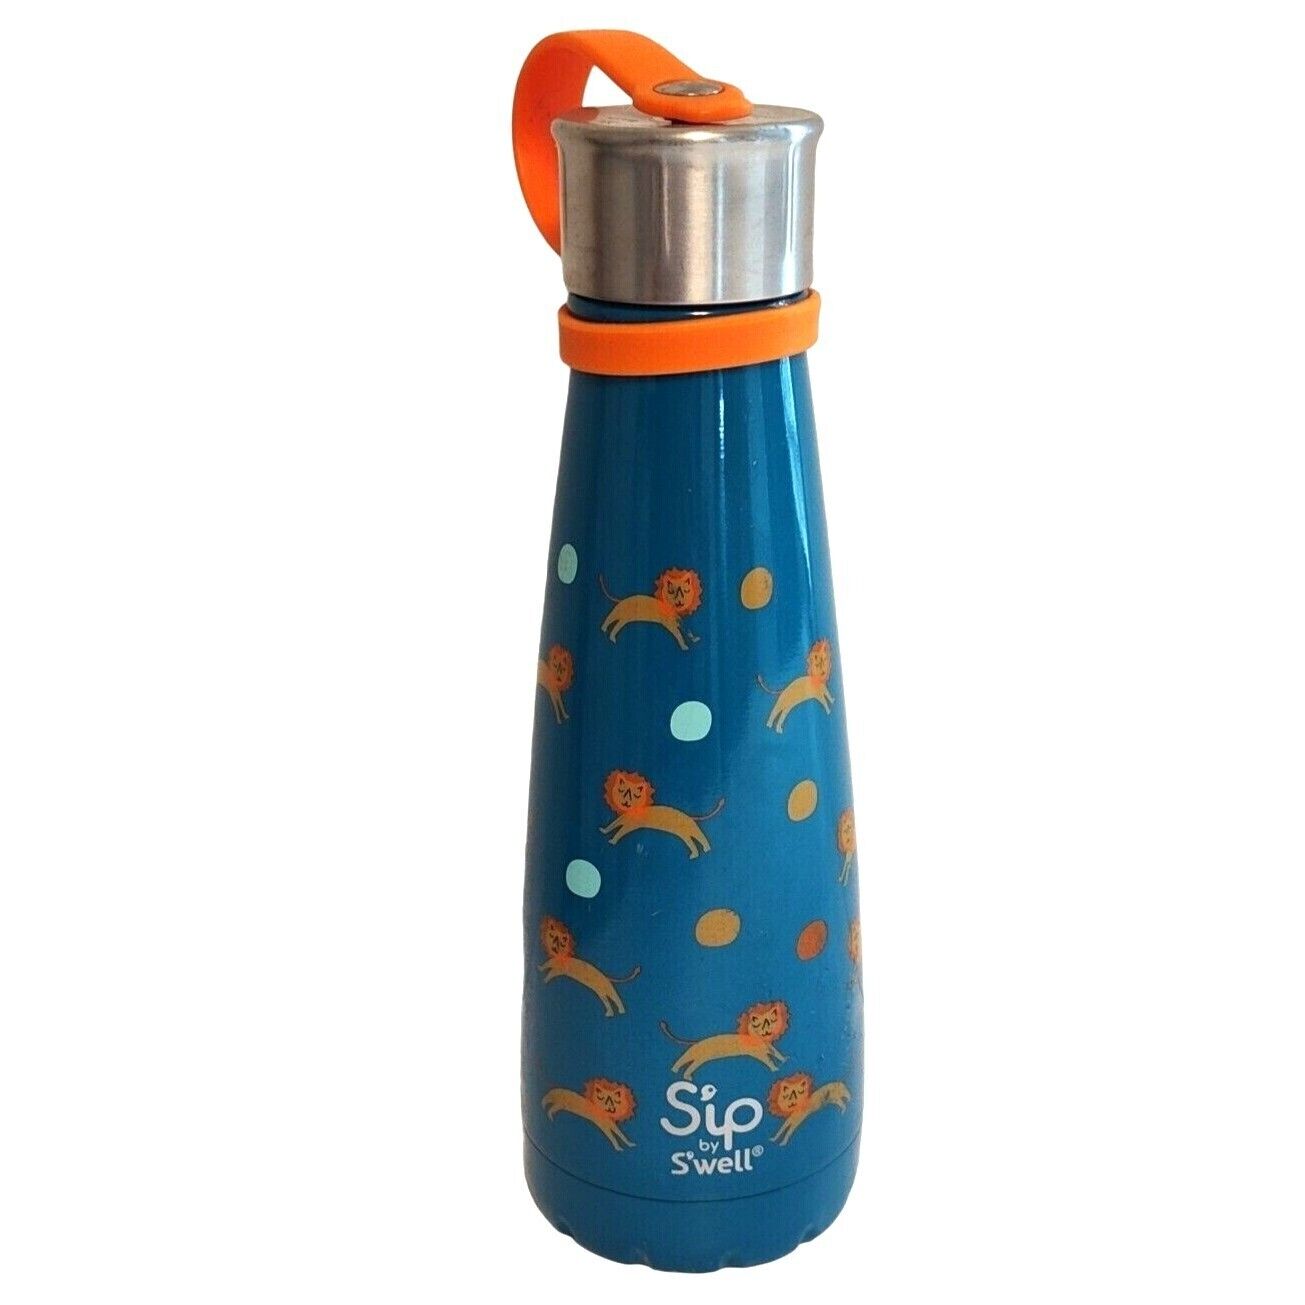 Sip by Swell Little Lion Insulated Water Bottle Blue Orange Hot or Cold